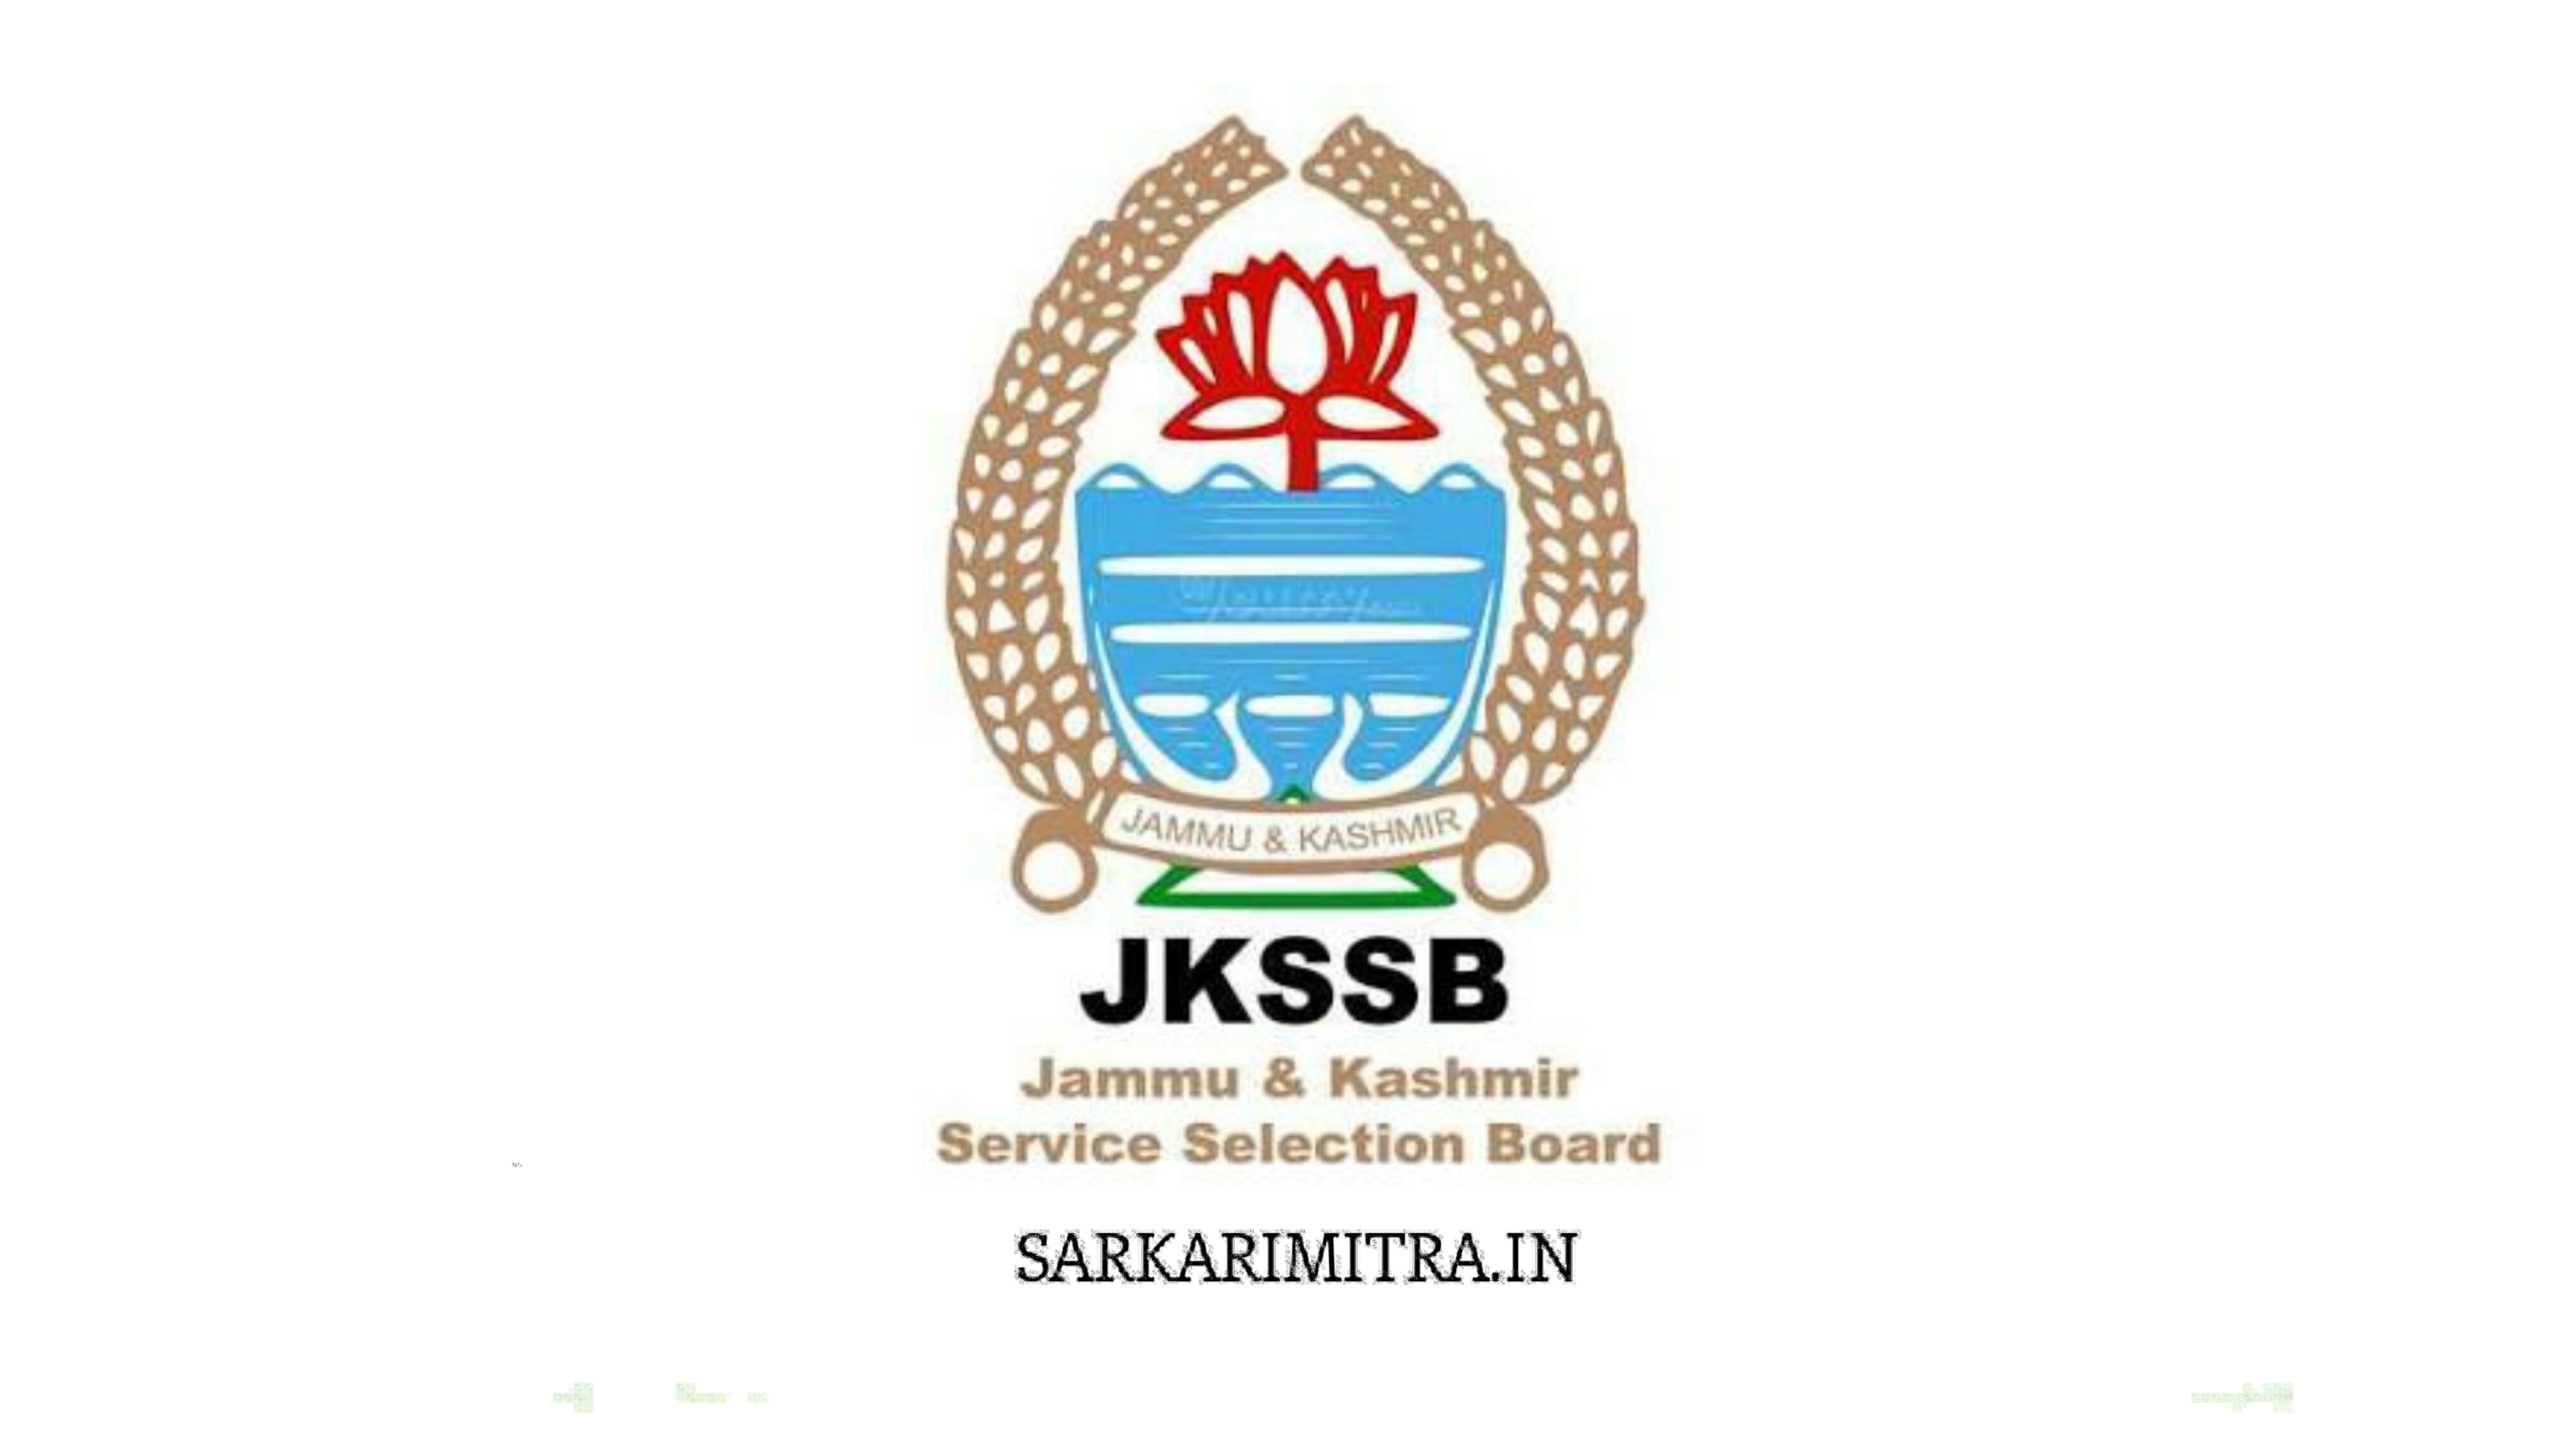 JKSSB INVITES ONLINE APPLICATIONS FOR 2311 Posts Of Patwari, JR ASSISTANT, Jr Steno  AND OTHER POSTS, APPLY RIGHT AWAY!